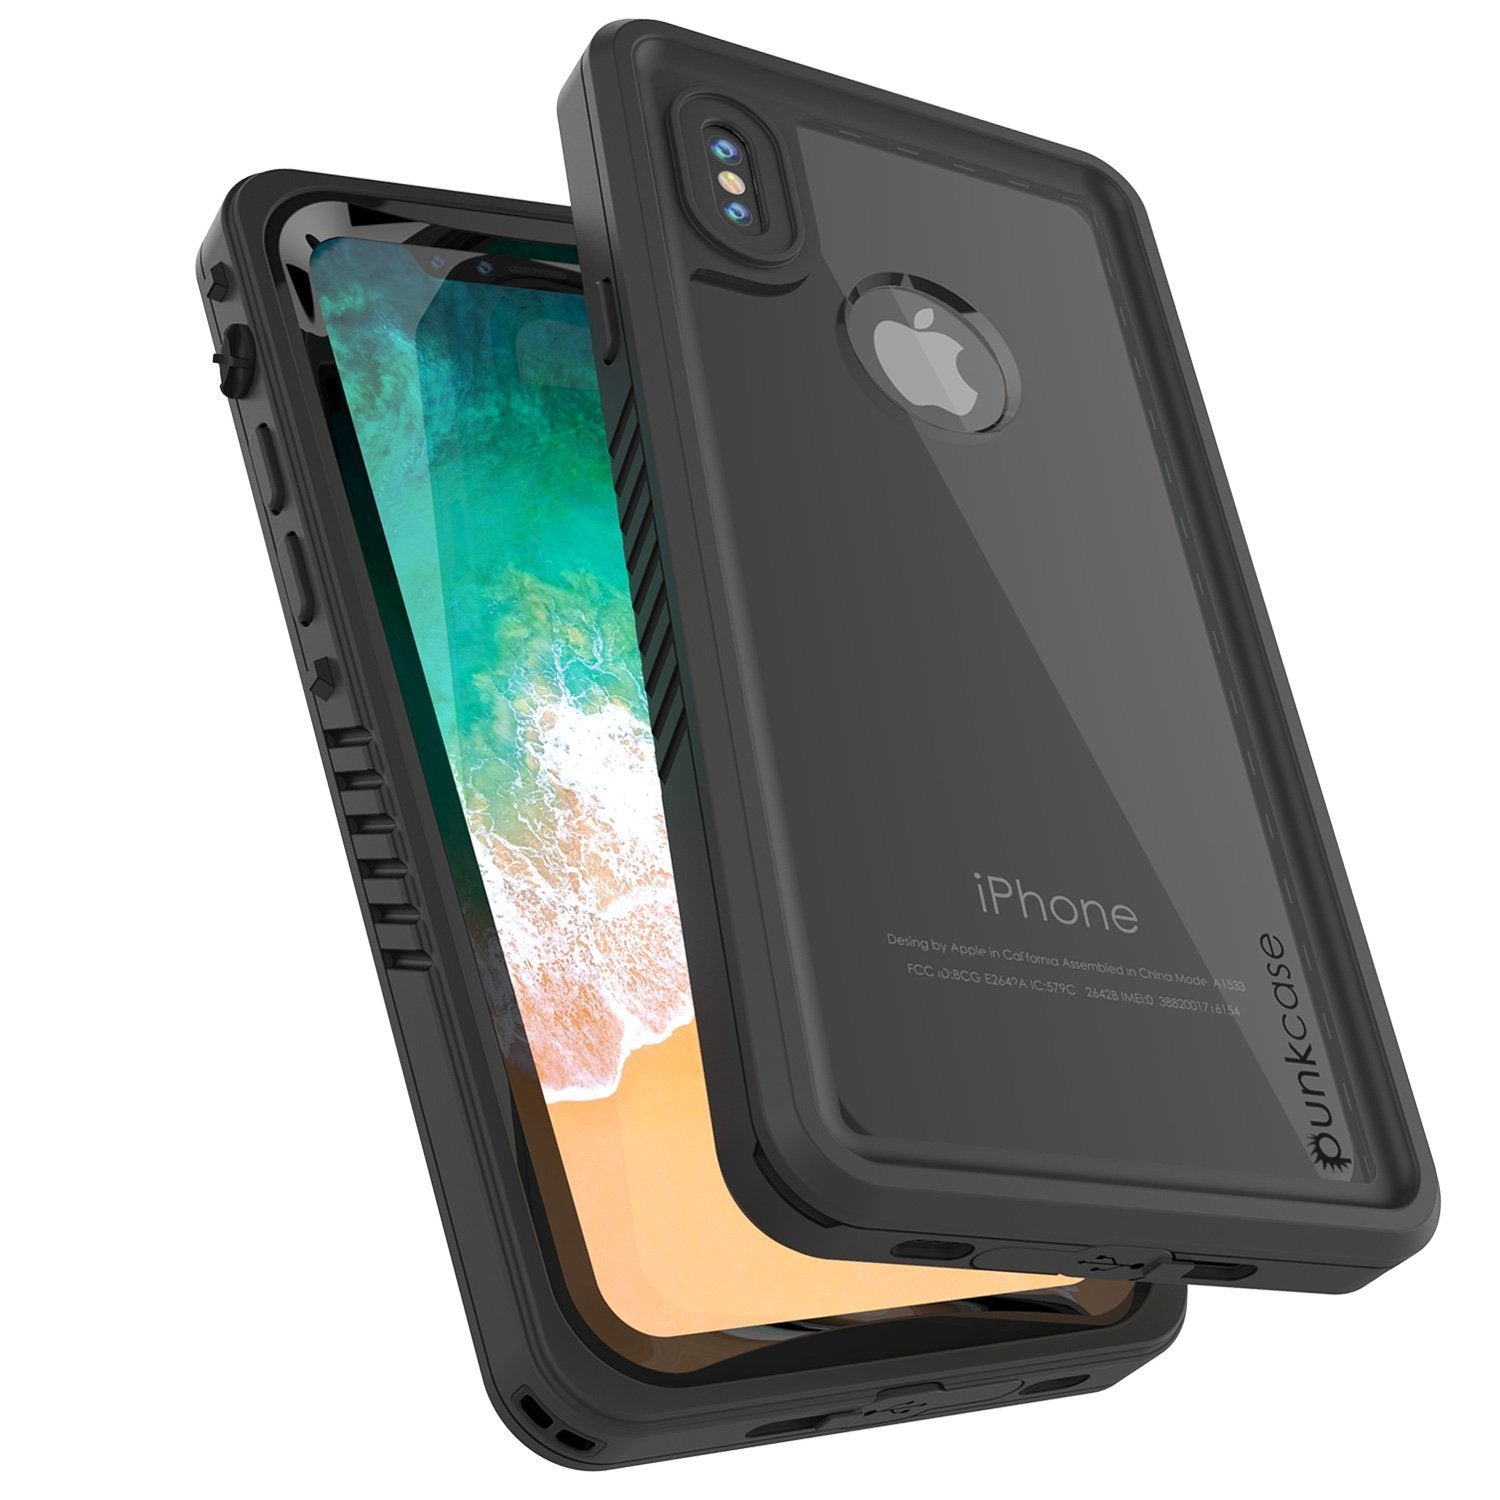 iPhone XS Max Waterproof Case, Punkcase [Extreme Series] Armor Cover W/ Built In Screen Protector [Black]